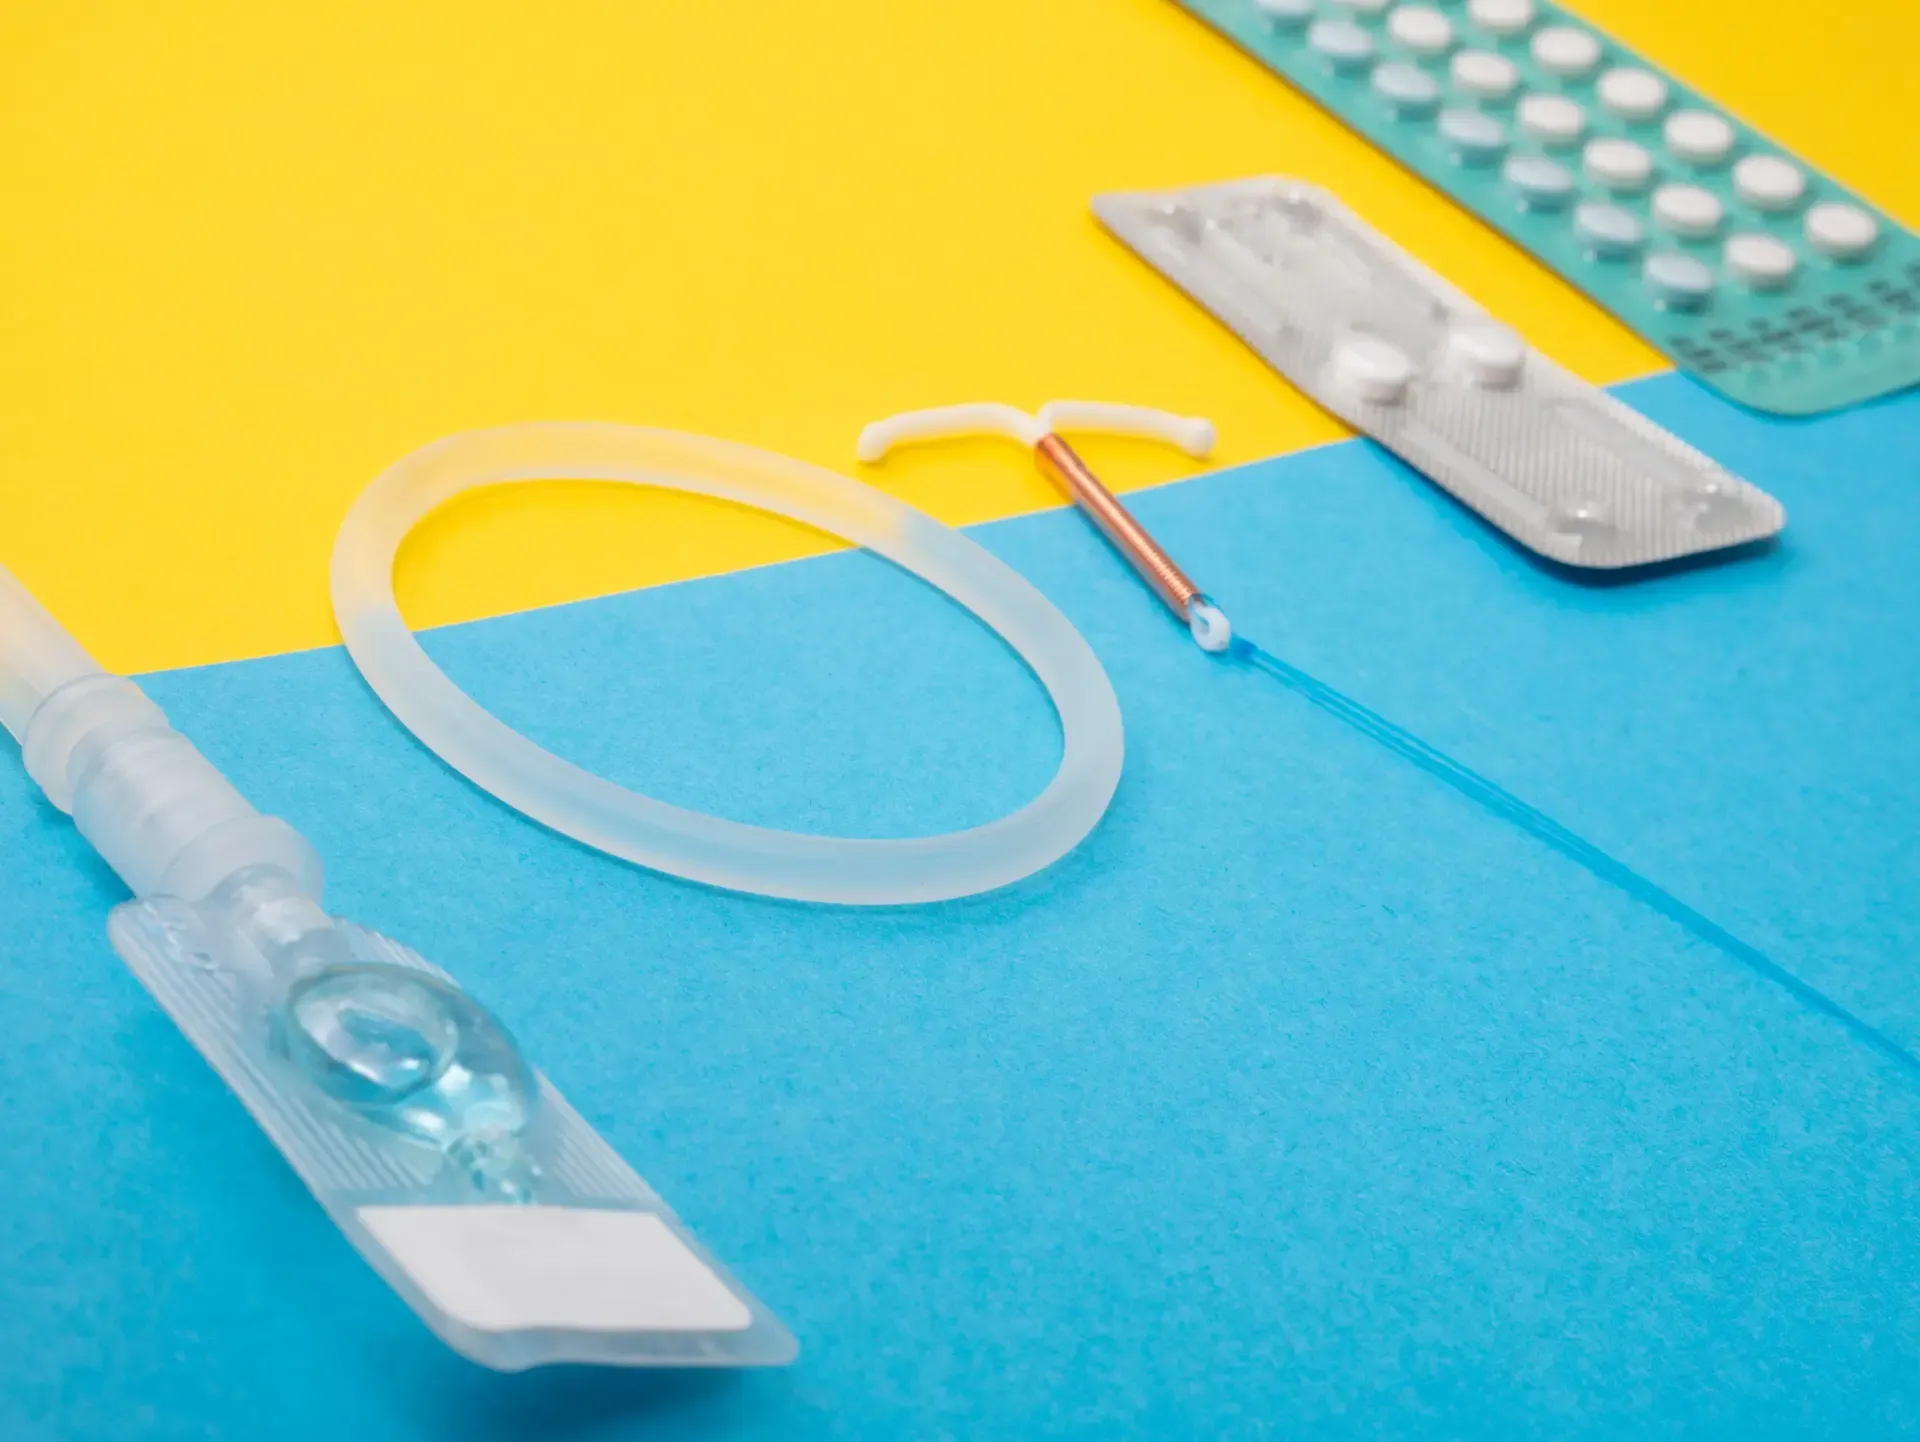 various methods of contraception including birth control pills, morning after pill, and IUD on a blue and yellow background